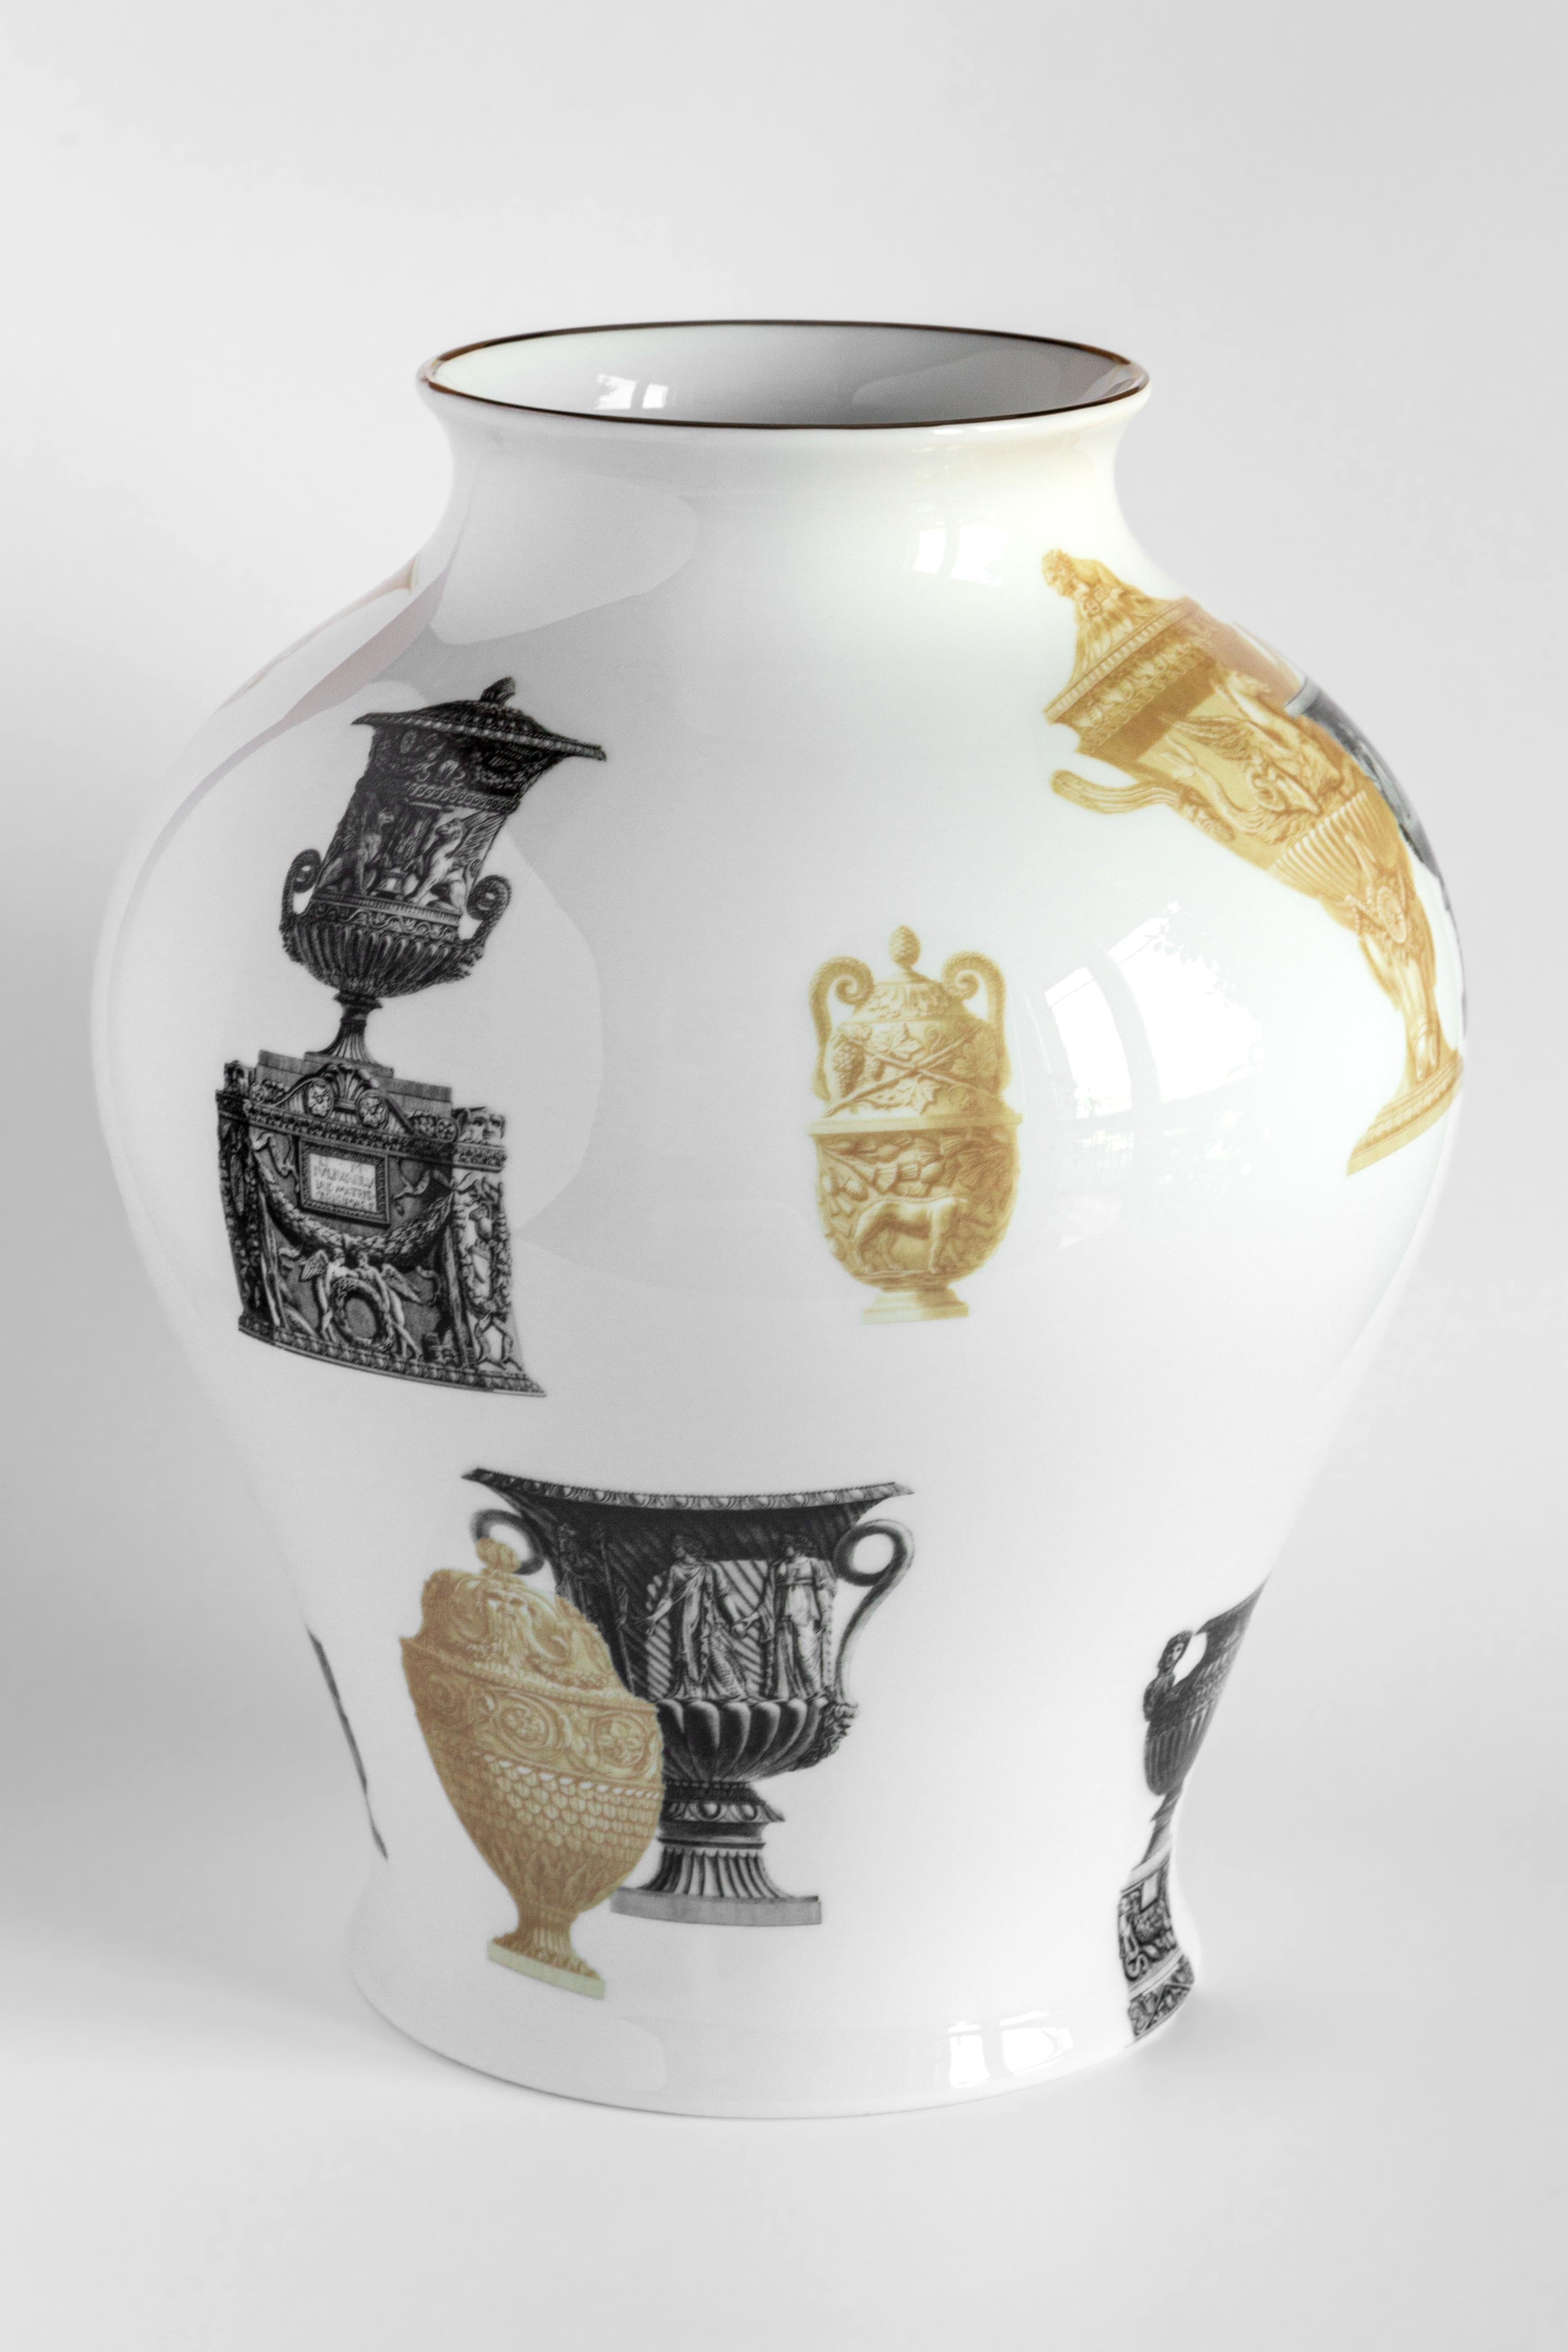 The Classic design of this porcelain vase comes back to life with retro decorations with a contemporary flavor. Handcrafted of porcelain, the piece celebrates the eternal city through a meticulous and exquisite image of multiple ornamental vases